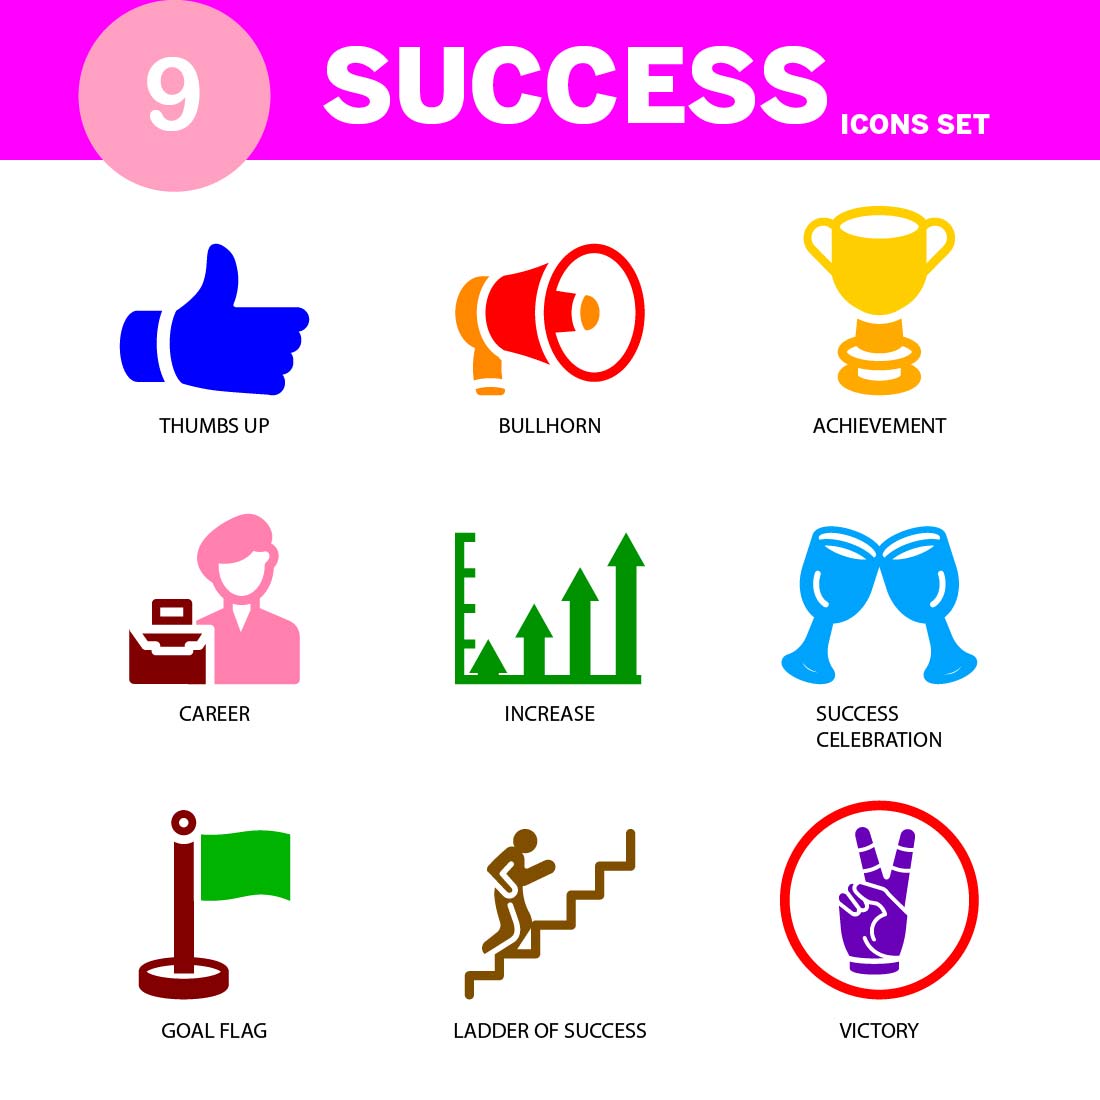 MODERN SUCCESS ICON SET COLOR EDITABLE AND RICBALE cover image.